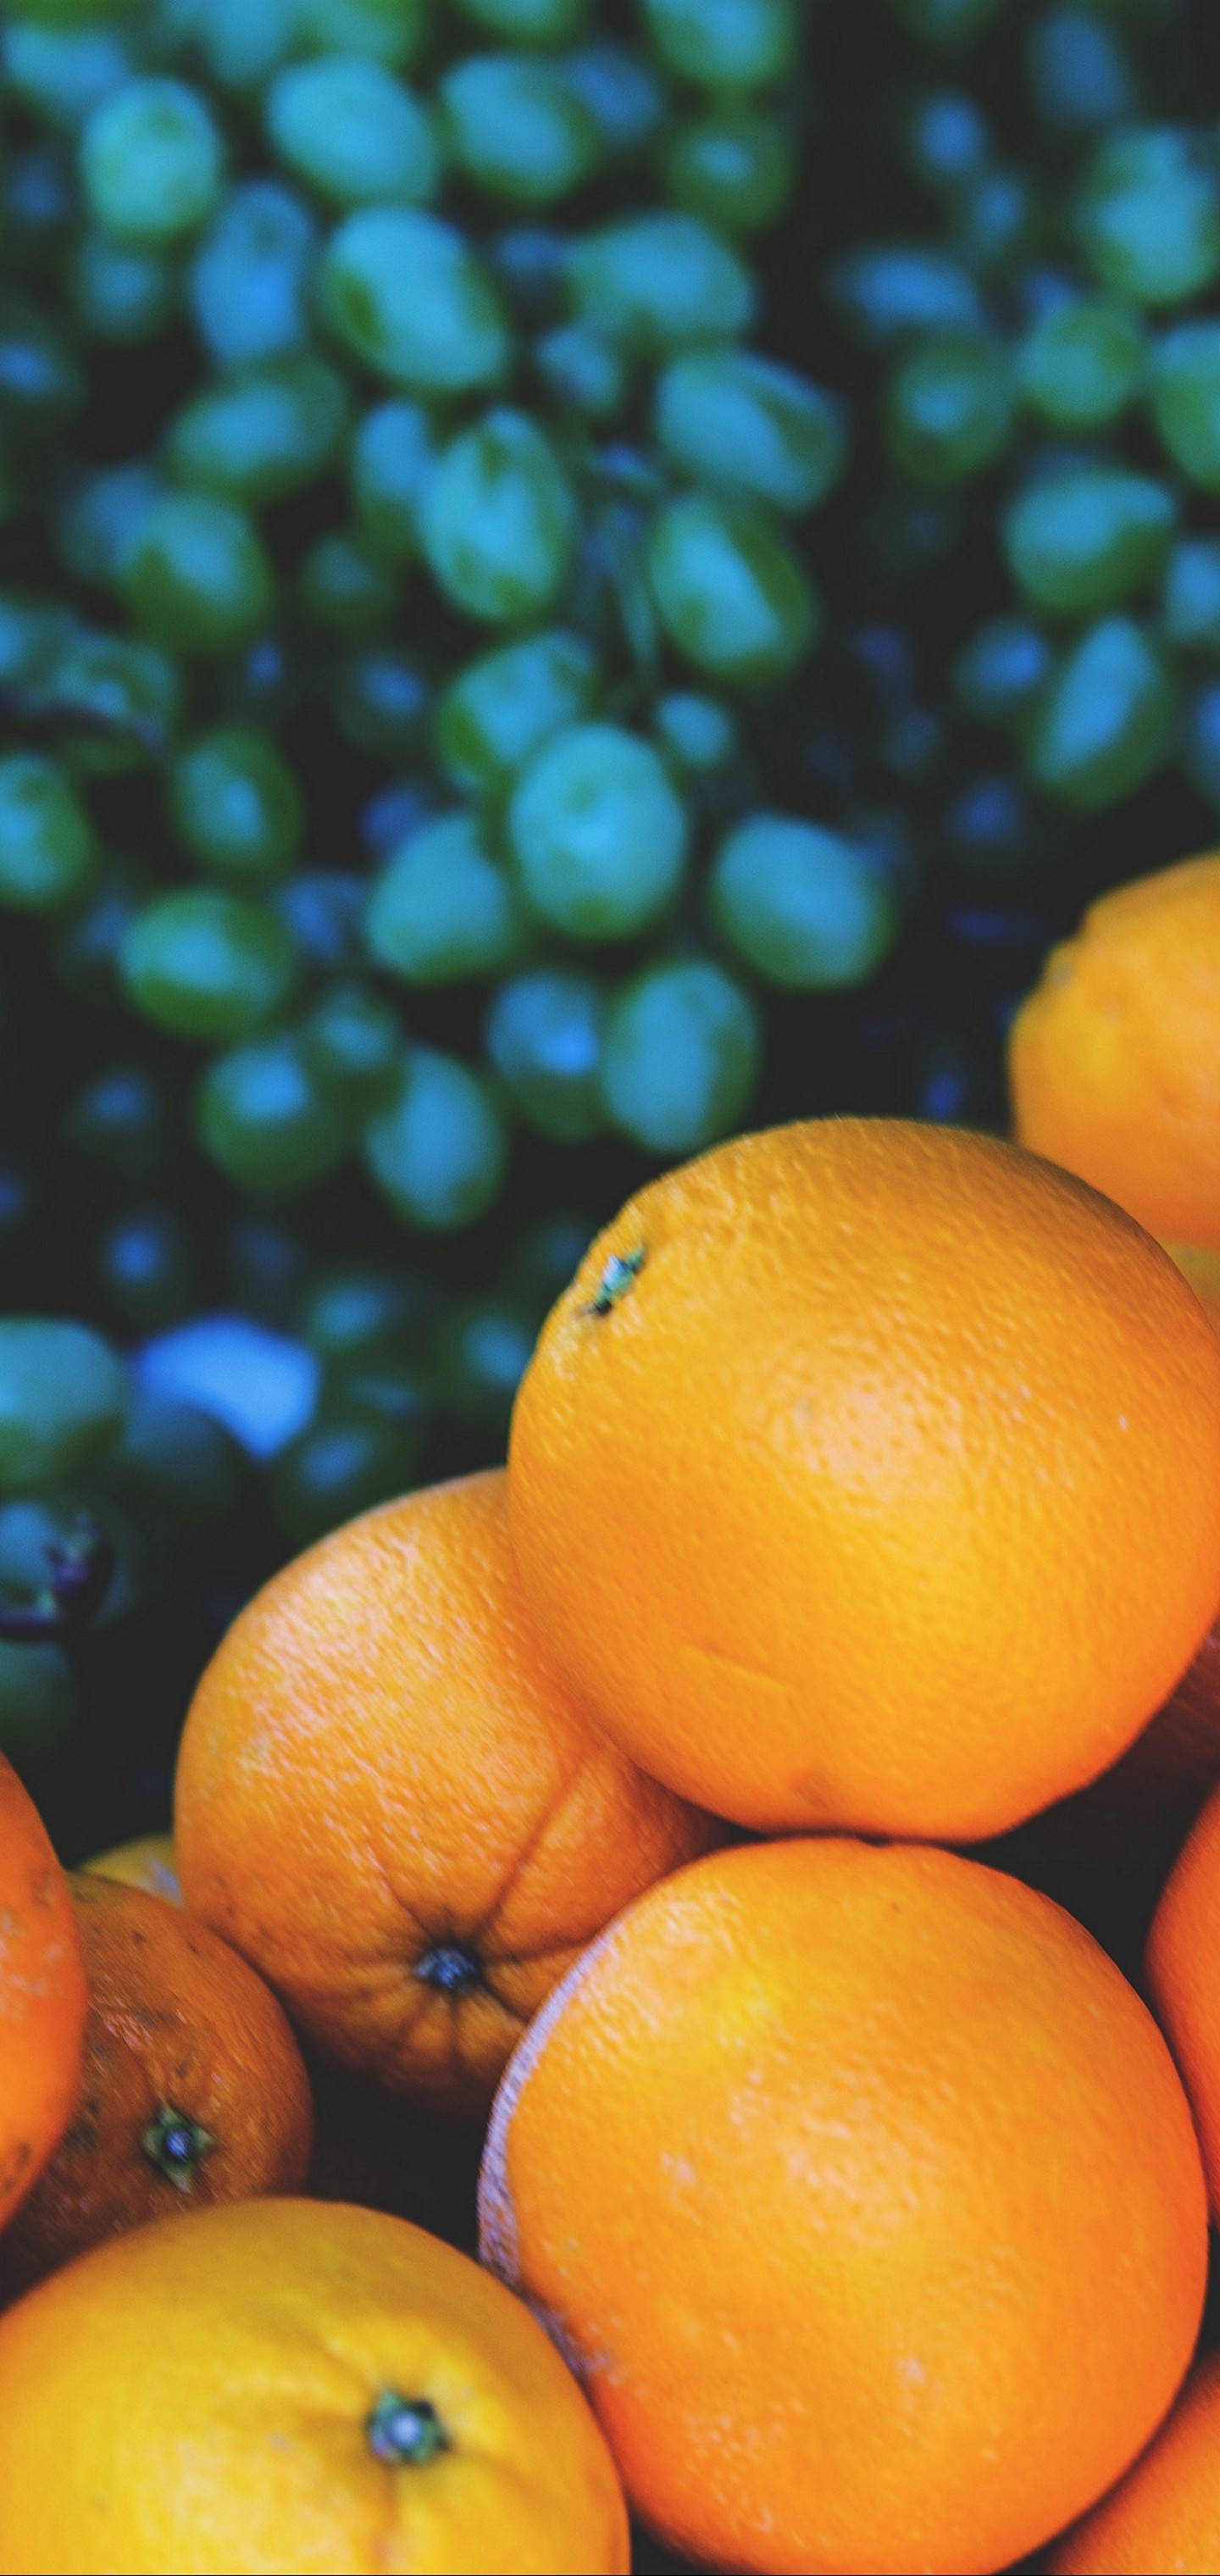 S10 Oranges And Grapes Background